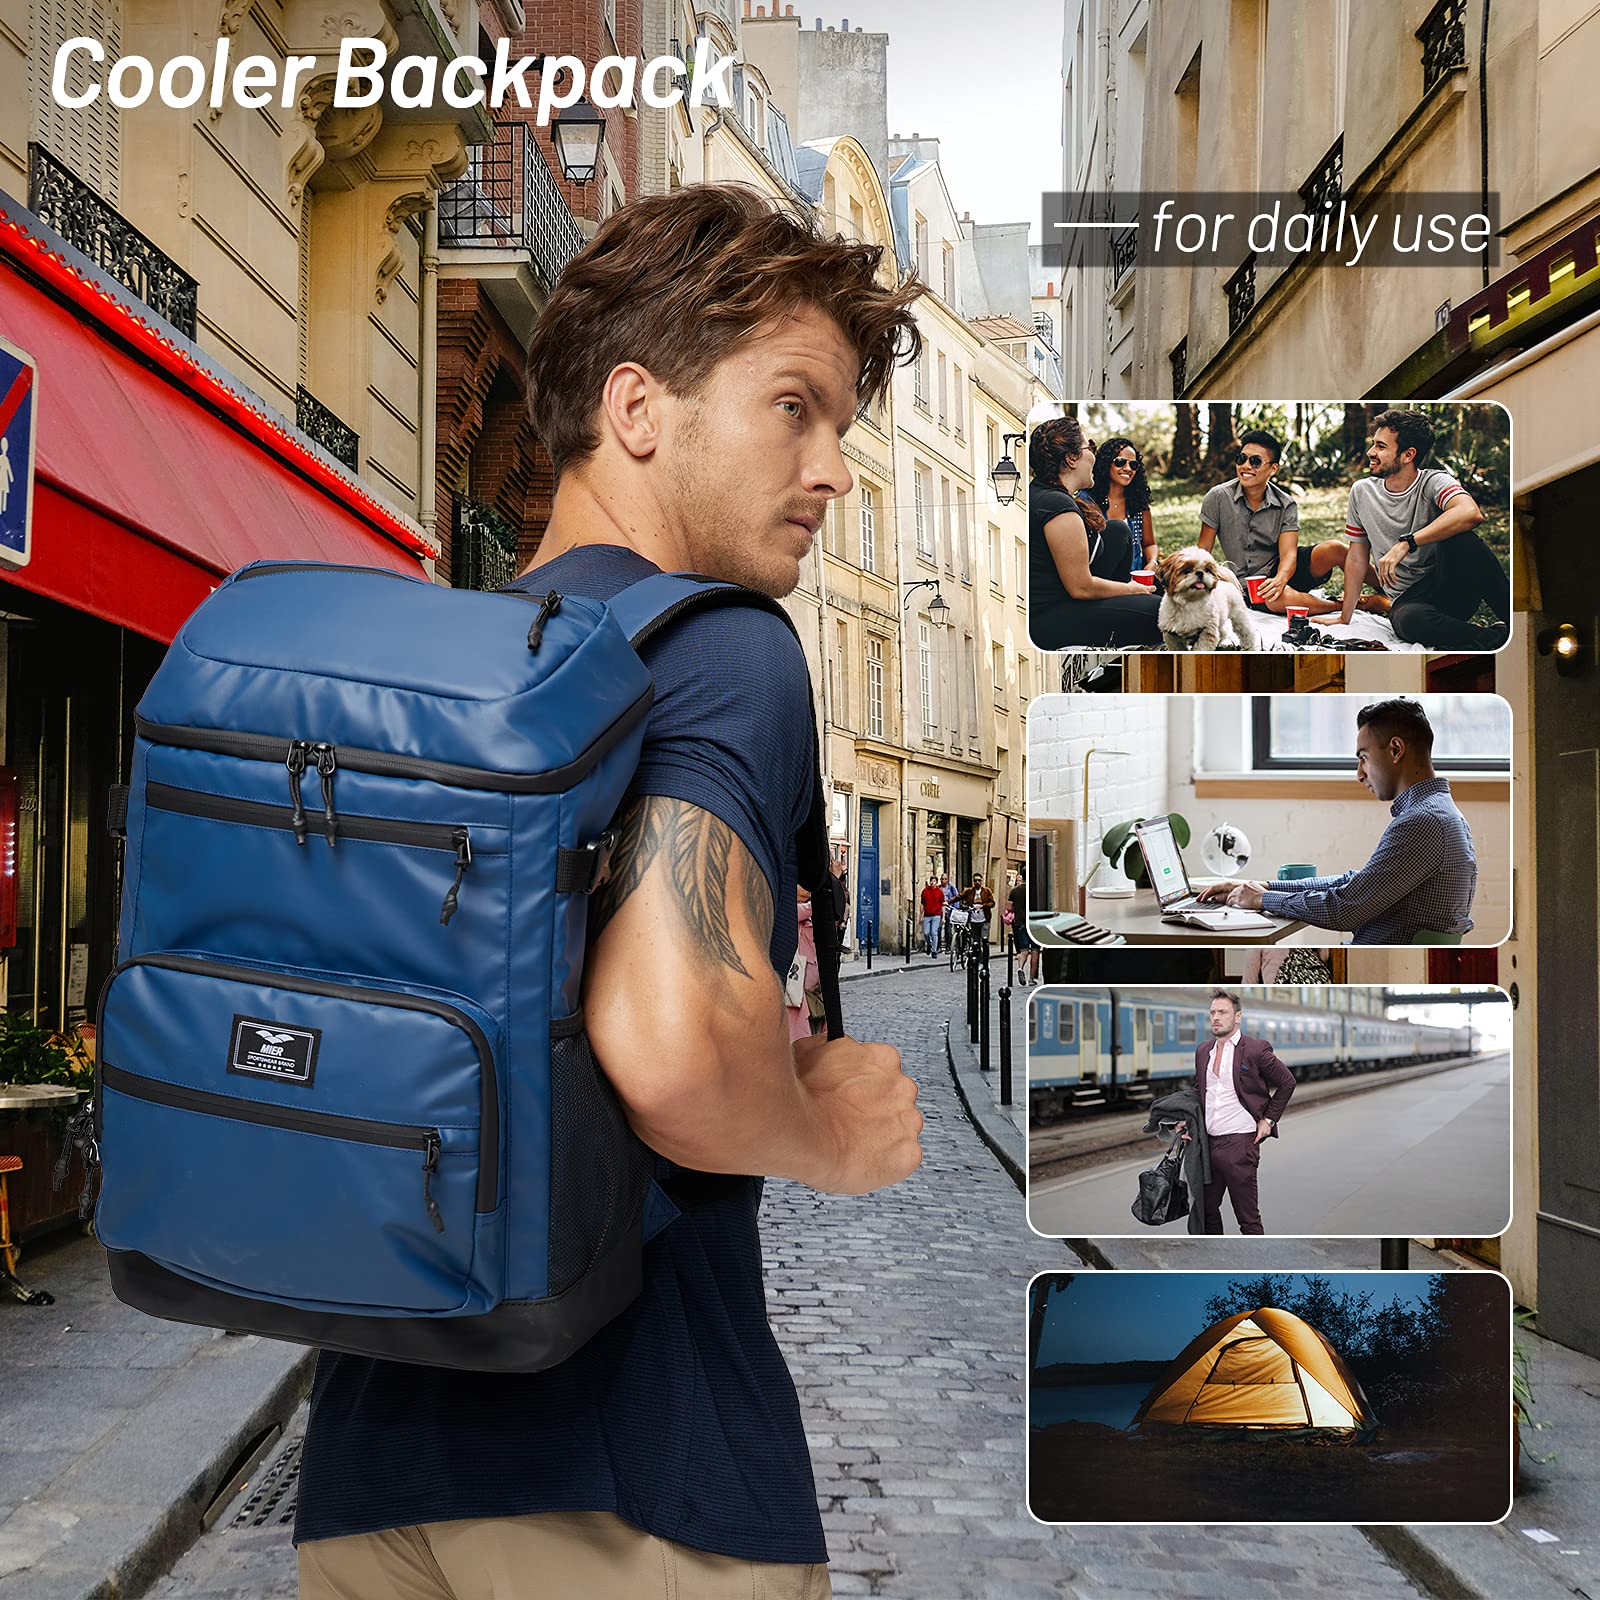 MIER Backpack Cooler Insulated Waterproof Cooler Backpack Leakproof Lightweight Back Pack with Cooler Compartment Soft Cooler for Men Women to Work Beach Camping Hiking Picnics, 24 Cans